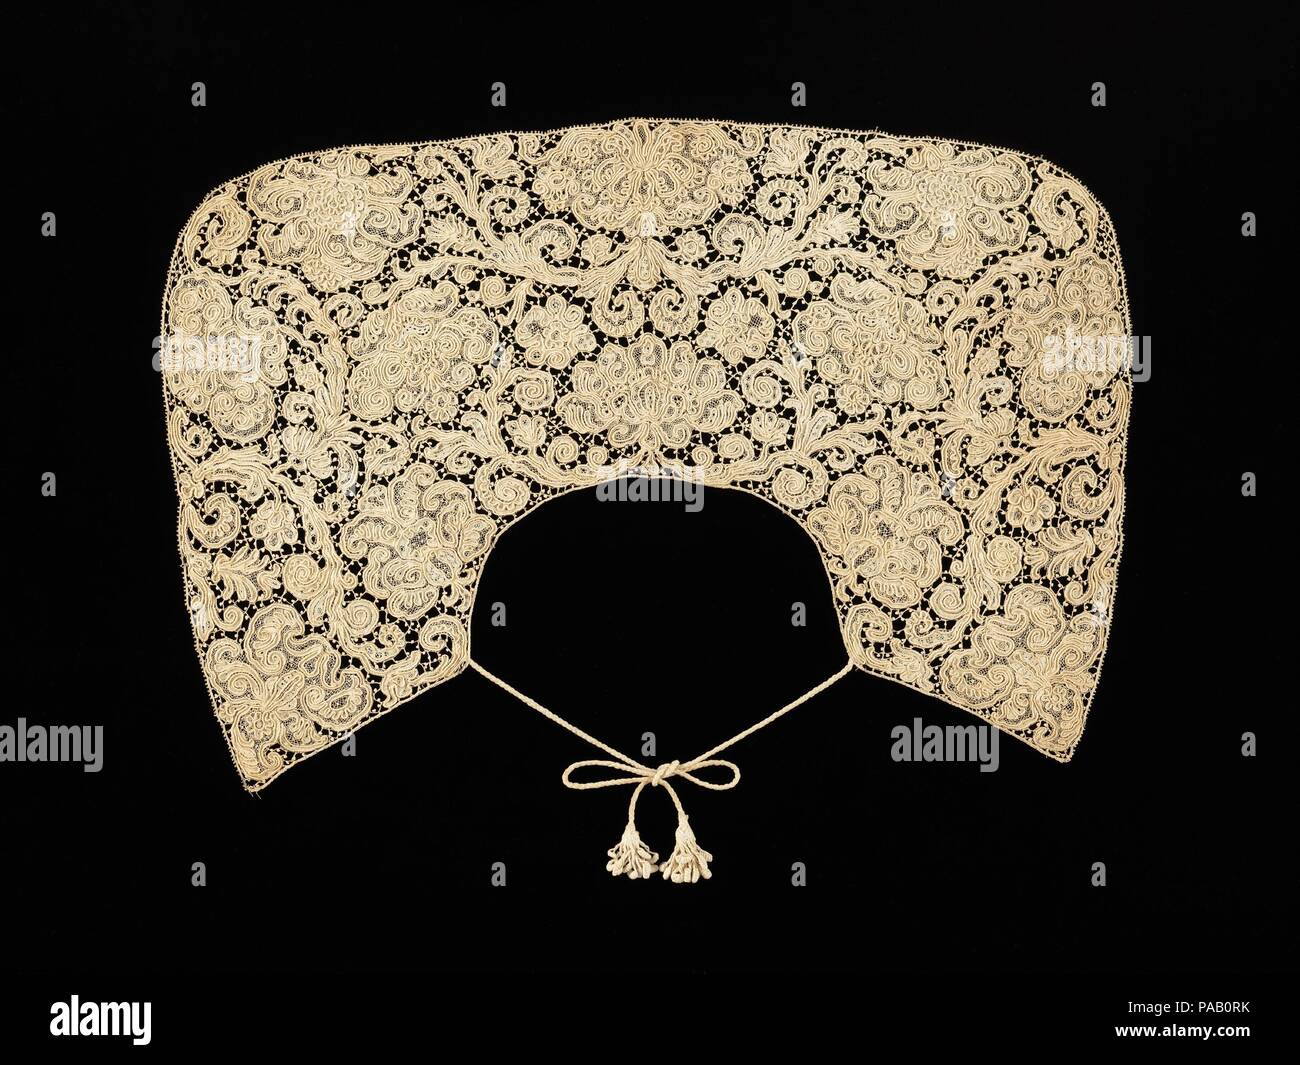 Collar. Culture: Spanish. Date: late 17th century. As it was customary to  refashion fine laces, early lace pieces in their original form are fairly  rare. That the lace pattern fills the whole